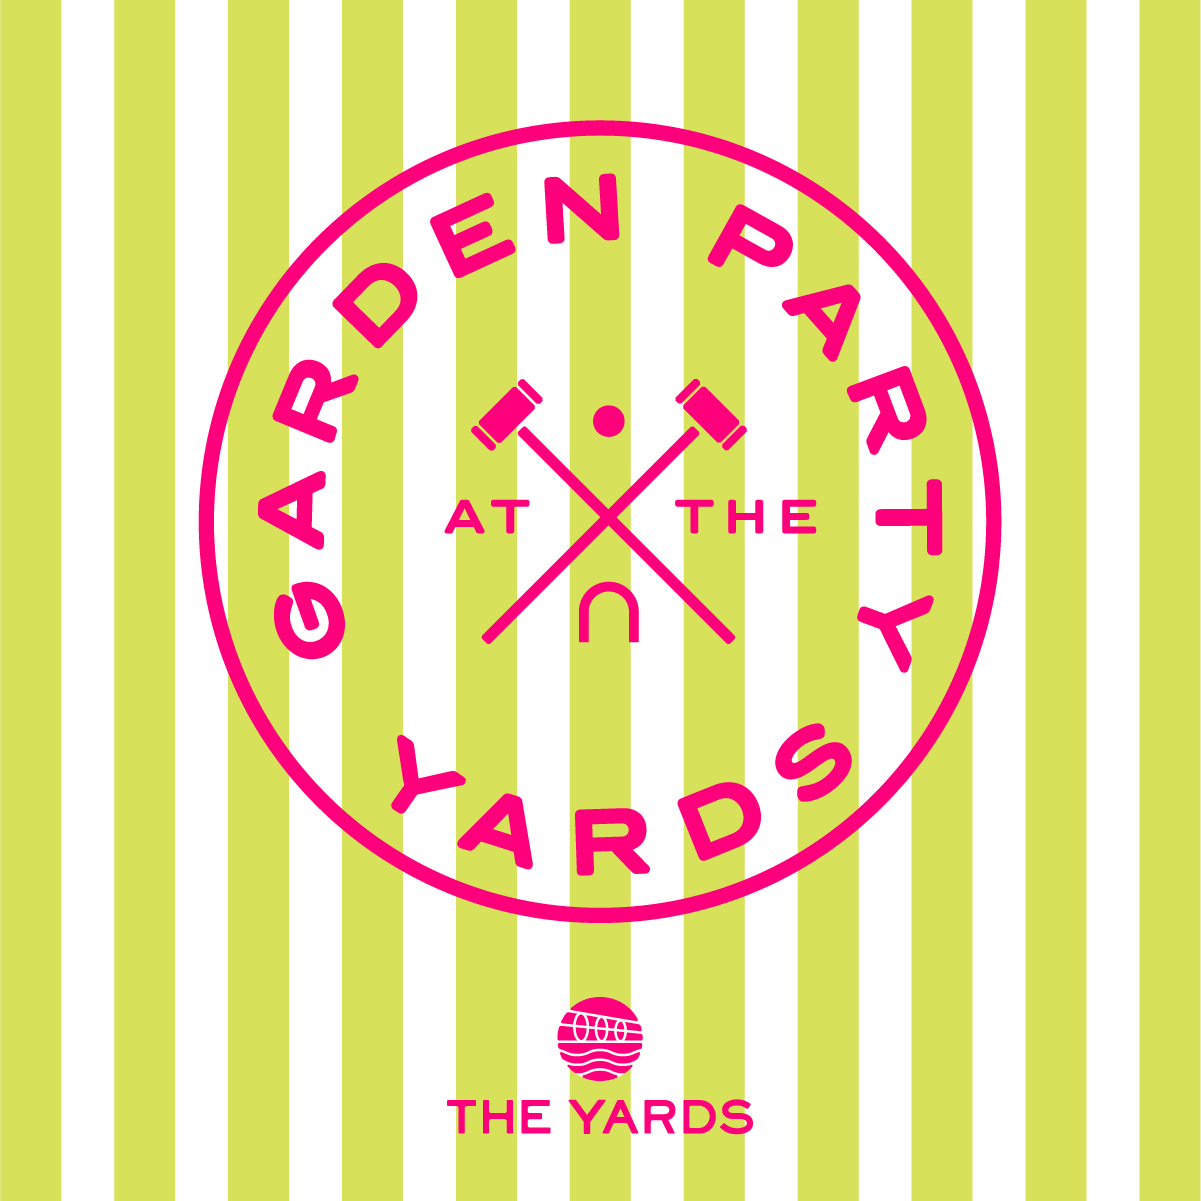 Garden Party at The Yards